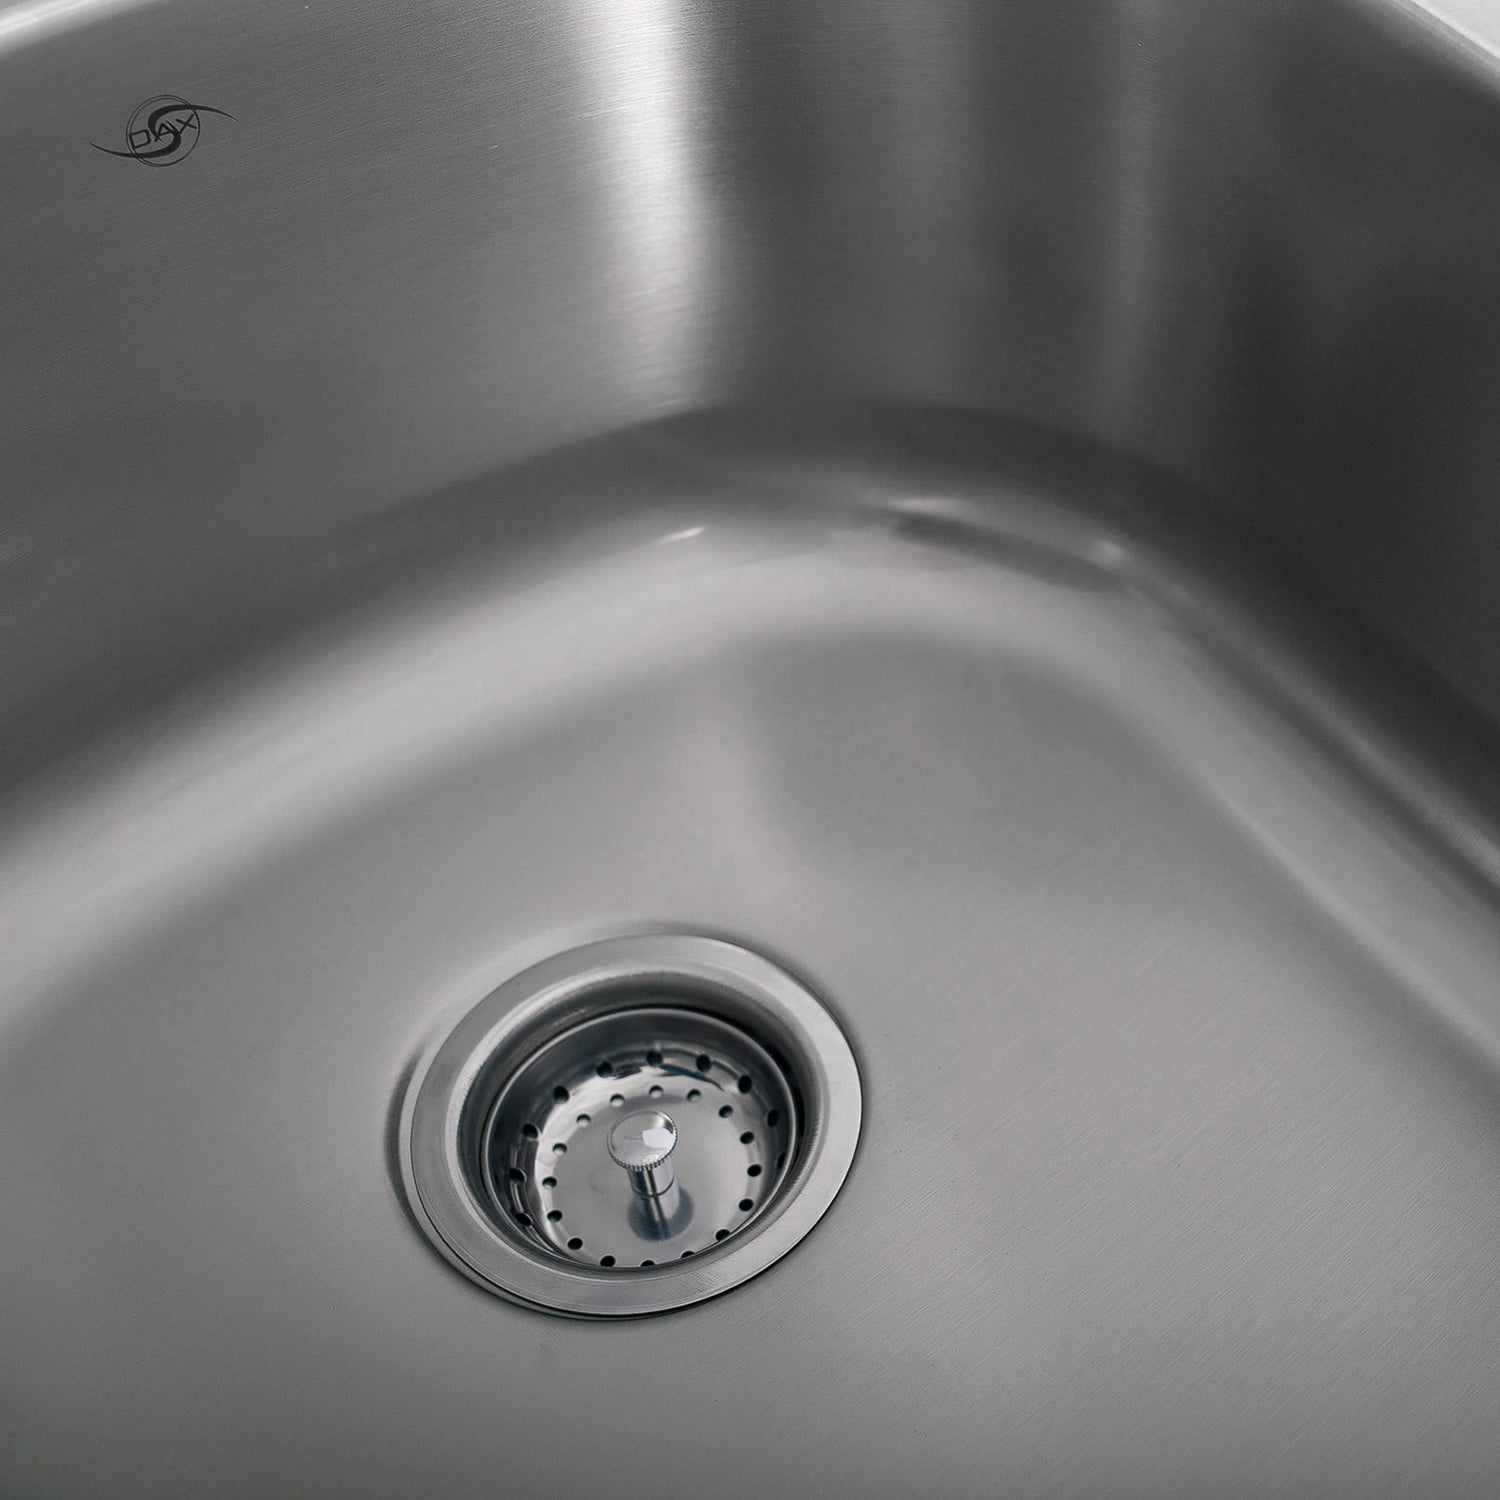 DAX 70/30 Double Bowl Undermount Kitchen Sink, 18 Gauge Stainless Steel, Brushed Finish , 31-1/2 x 20-1/2 x 9 Inches (DAX-3121L)